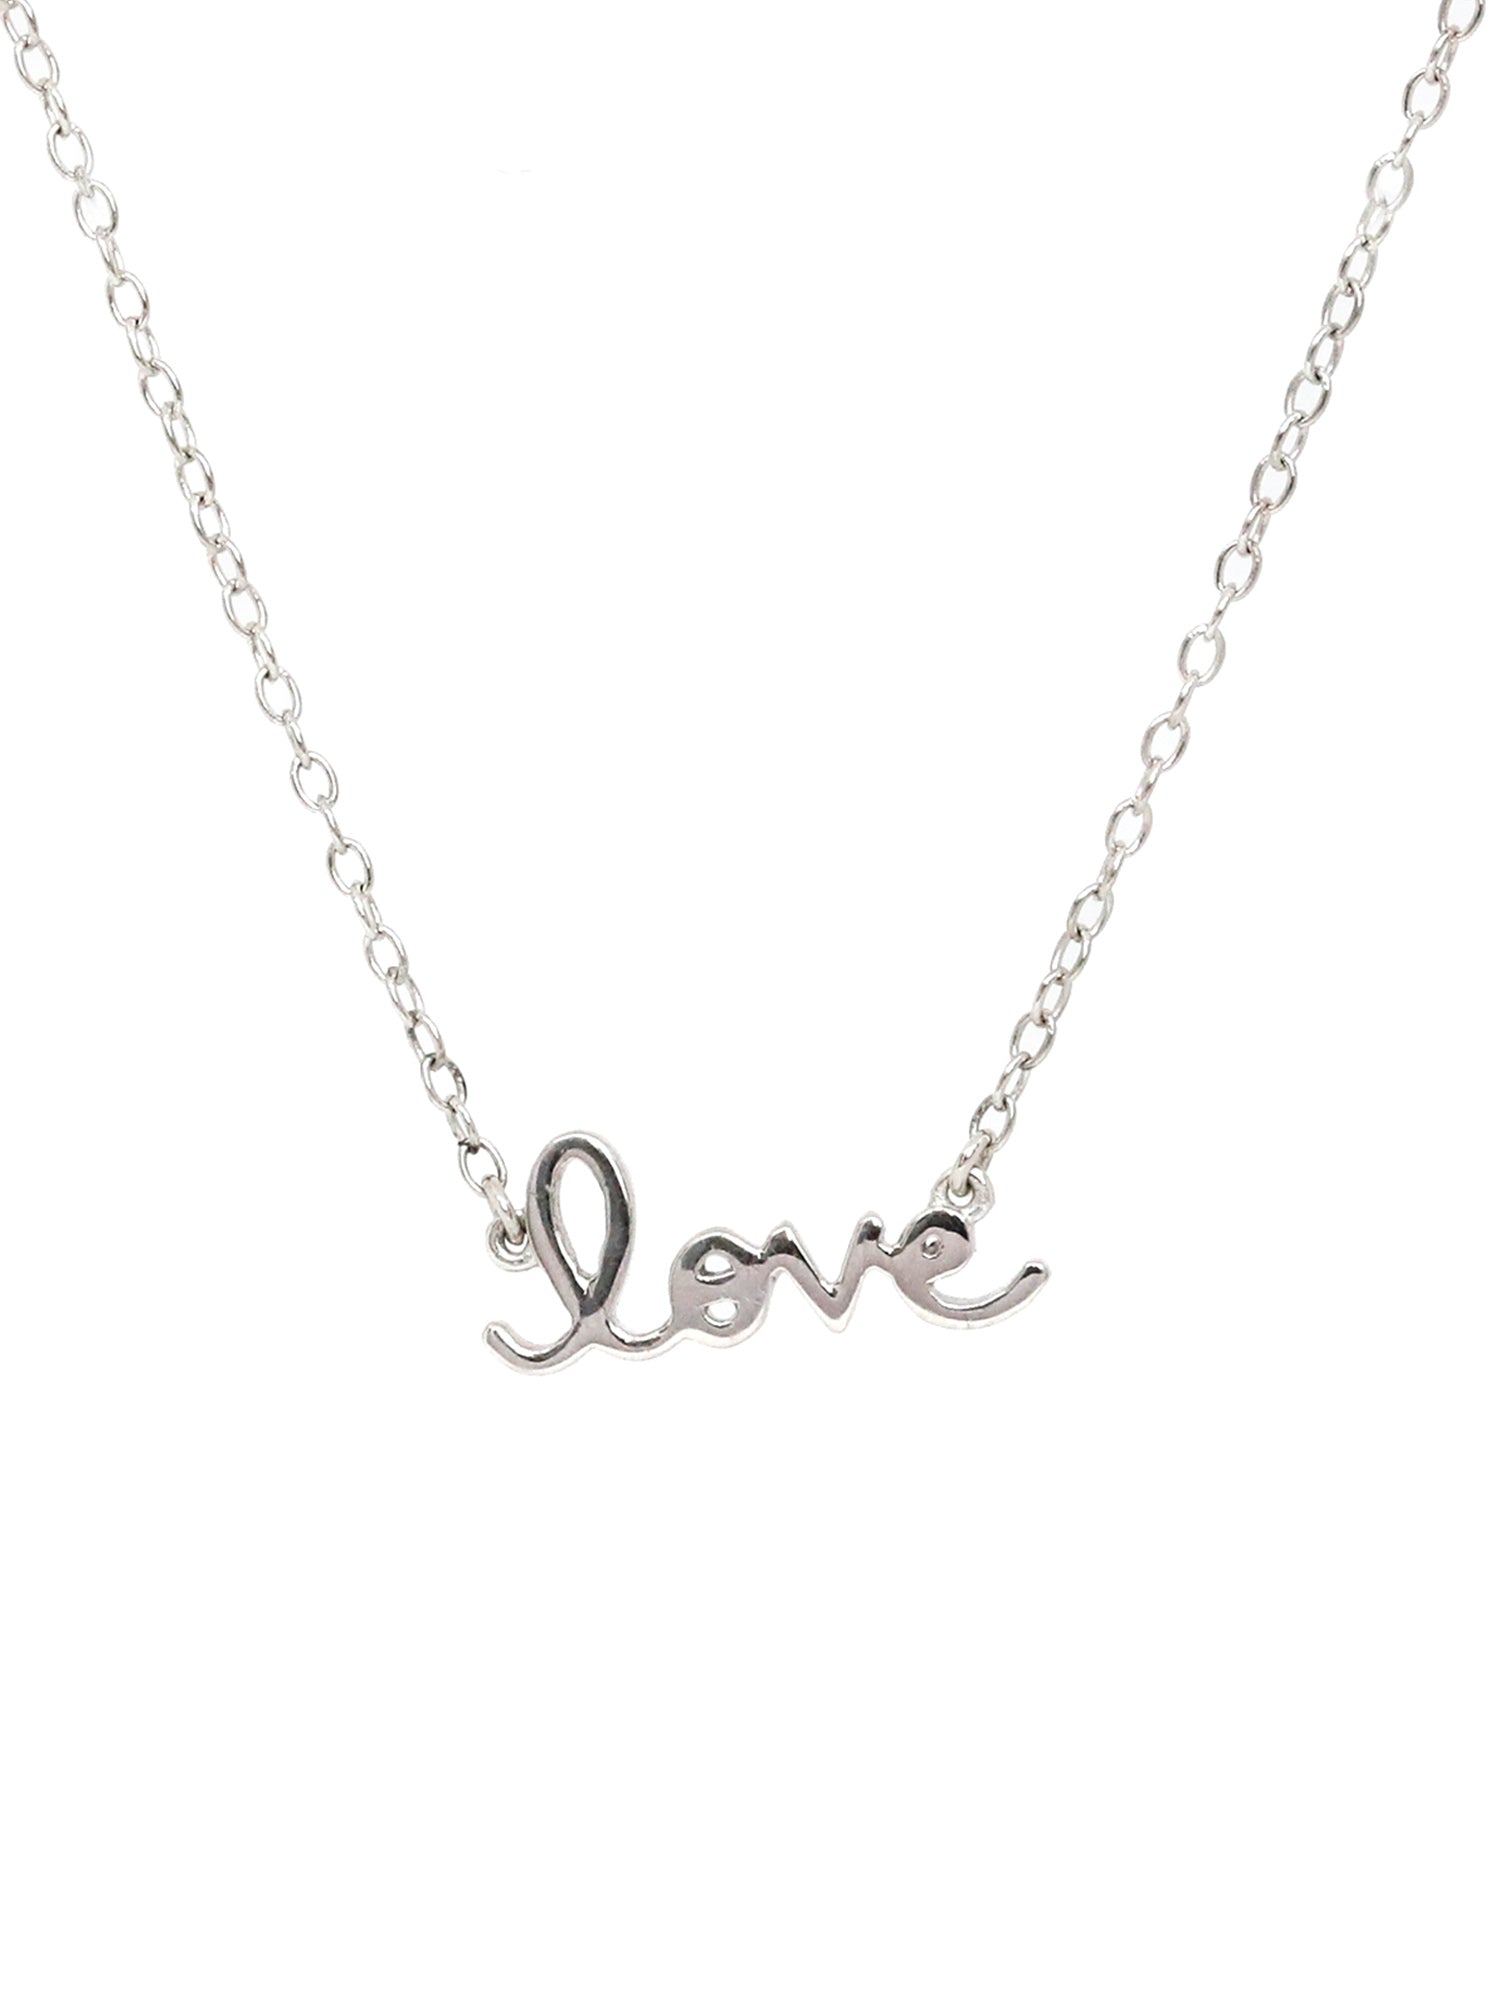 LOVE PENDANT WITH CHAIN